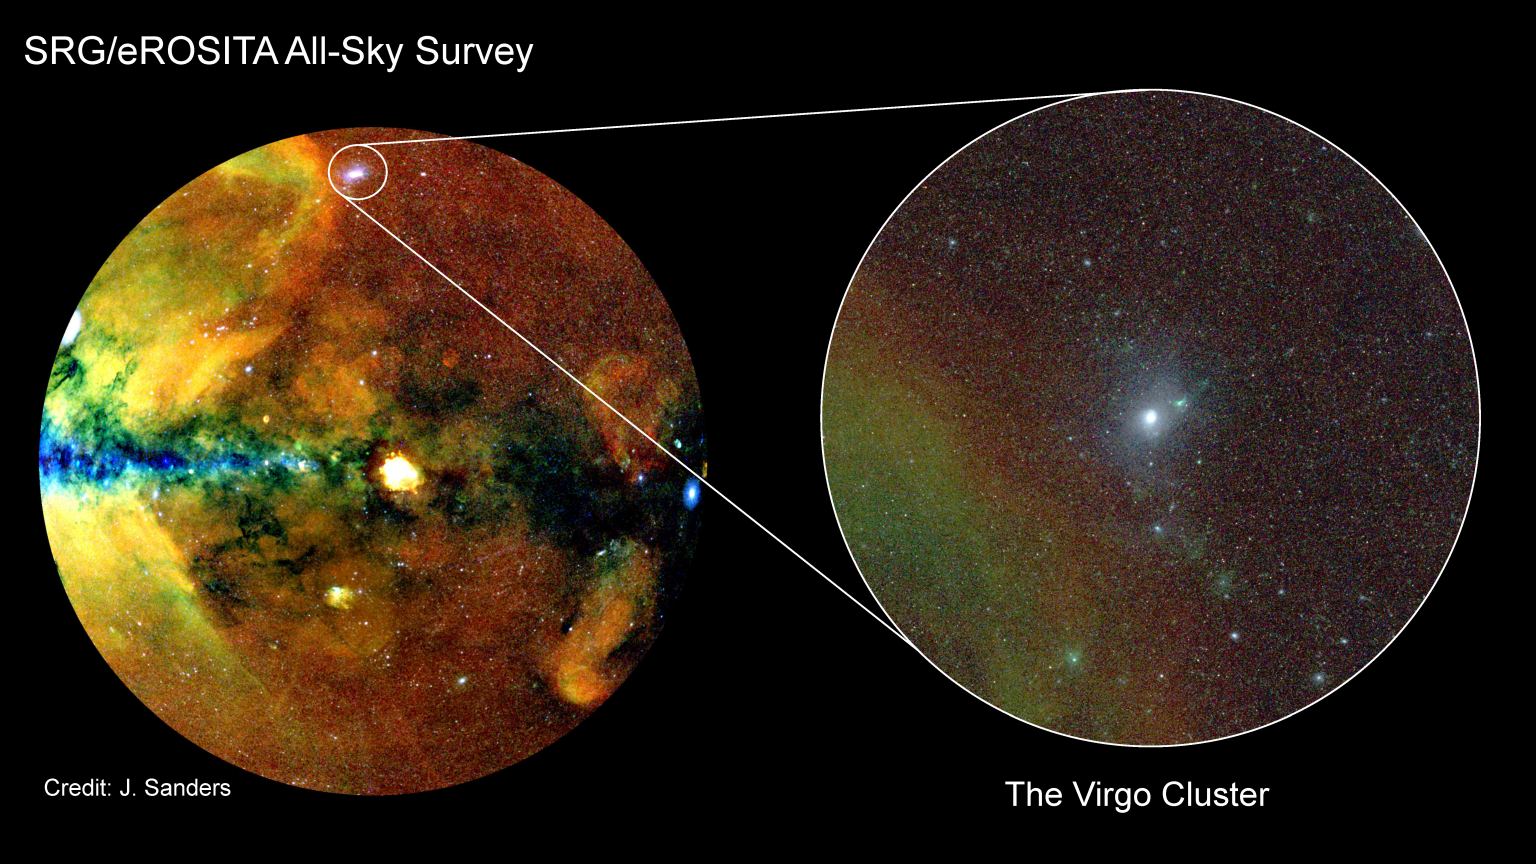 A clip showing the details of the Virgo Cluster in X-rays